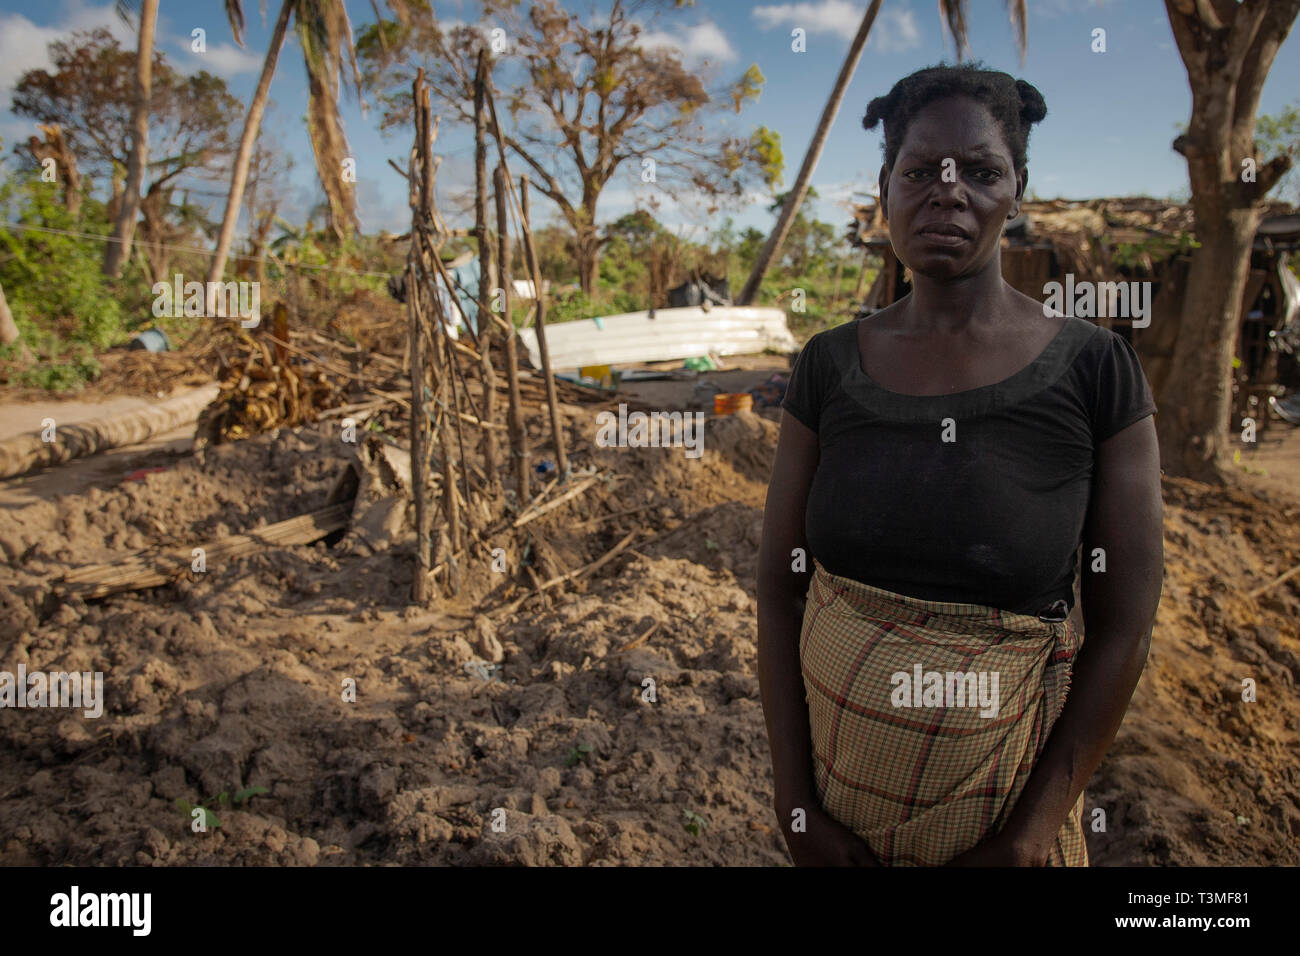 A Mozambican woman stands in front of the remains of her home in the aftermath of the massive Cyclone Idai April 6, 2019 in Nhagau, Mozambique. The World Food Programme, with help from the U.S. Air Force is transporting emergency relief supplies to assist the devastated region. Stock Photo